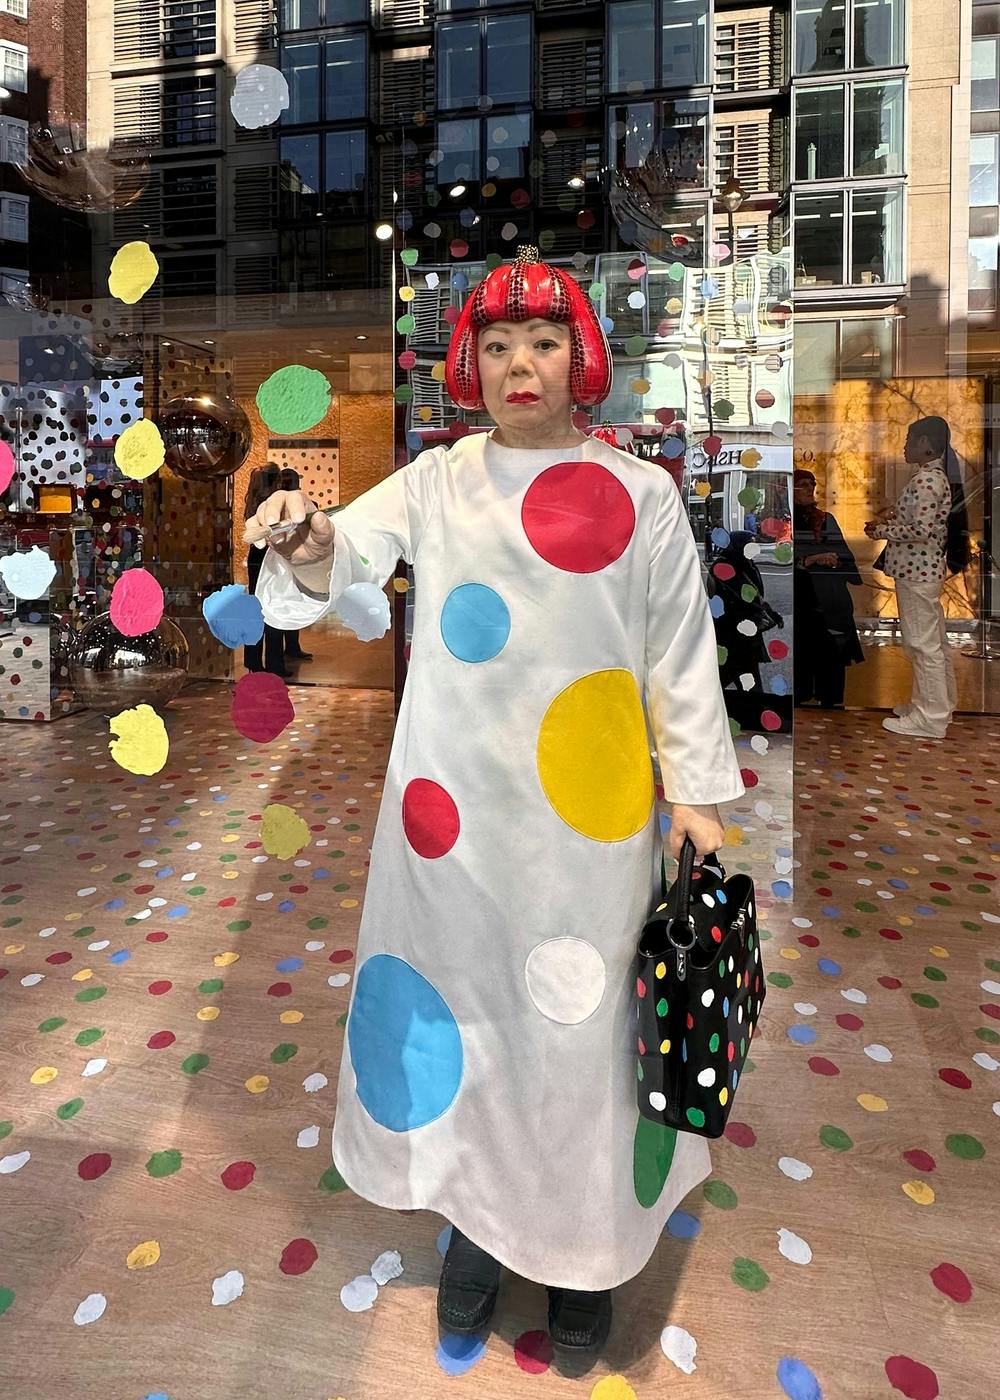 If you want to play the Yayoi Kusama claw machine game at Louis